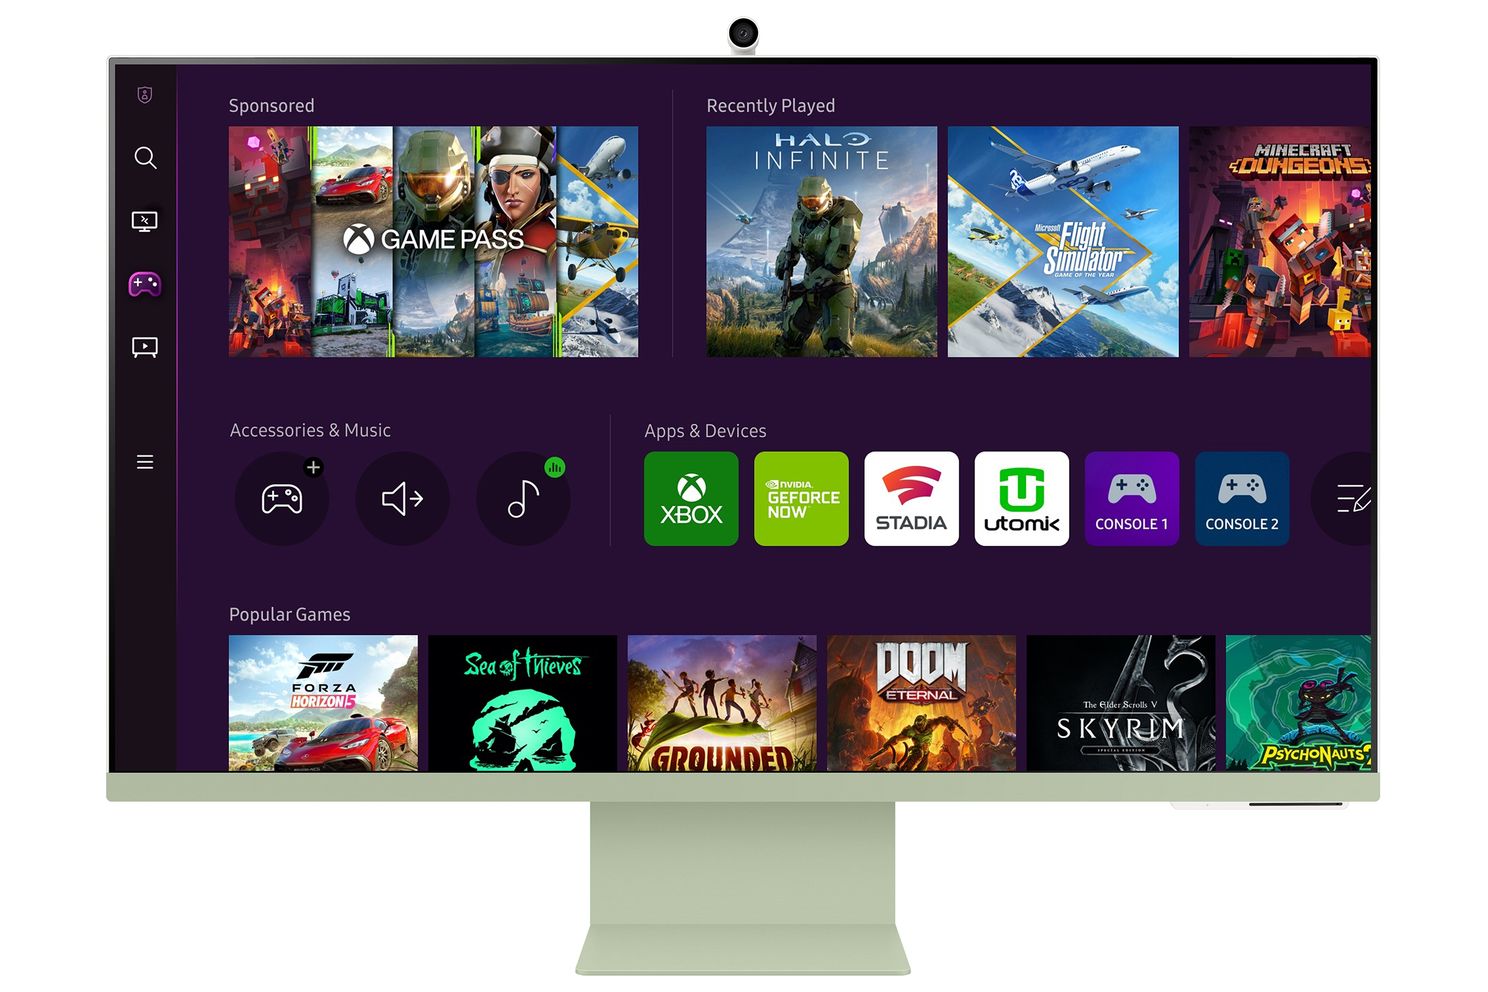 Xbox games can now be played directly on Samsung TVs